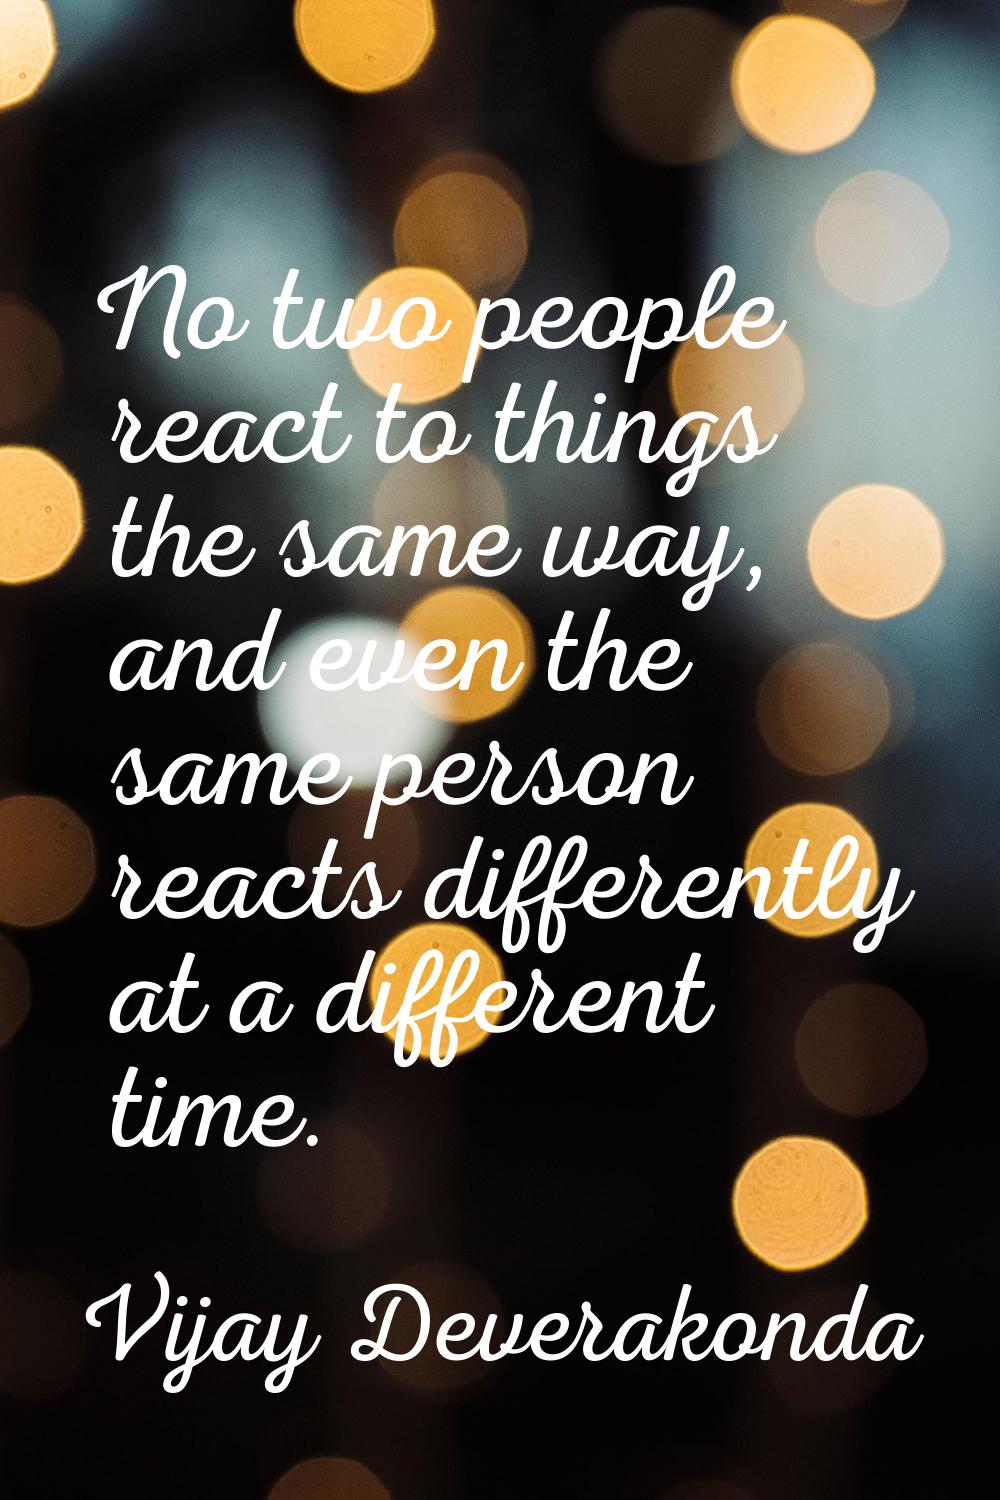 No two people react to things the same way, and even the same person reacts differently at a differ